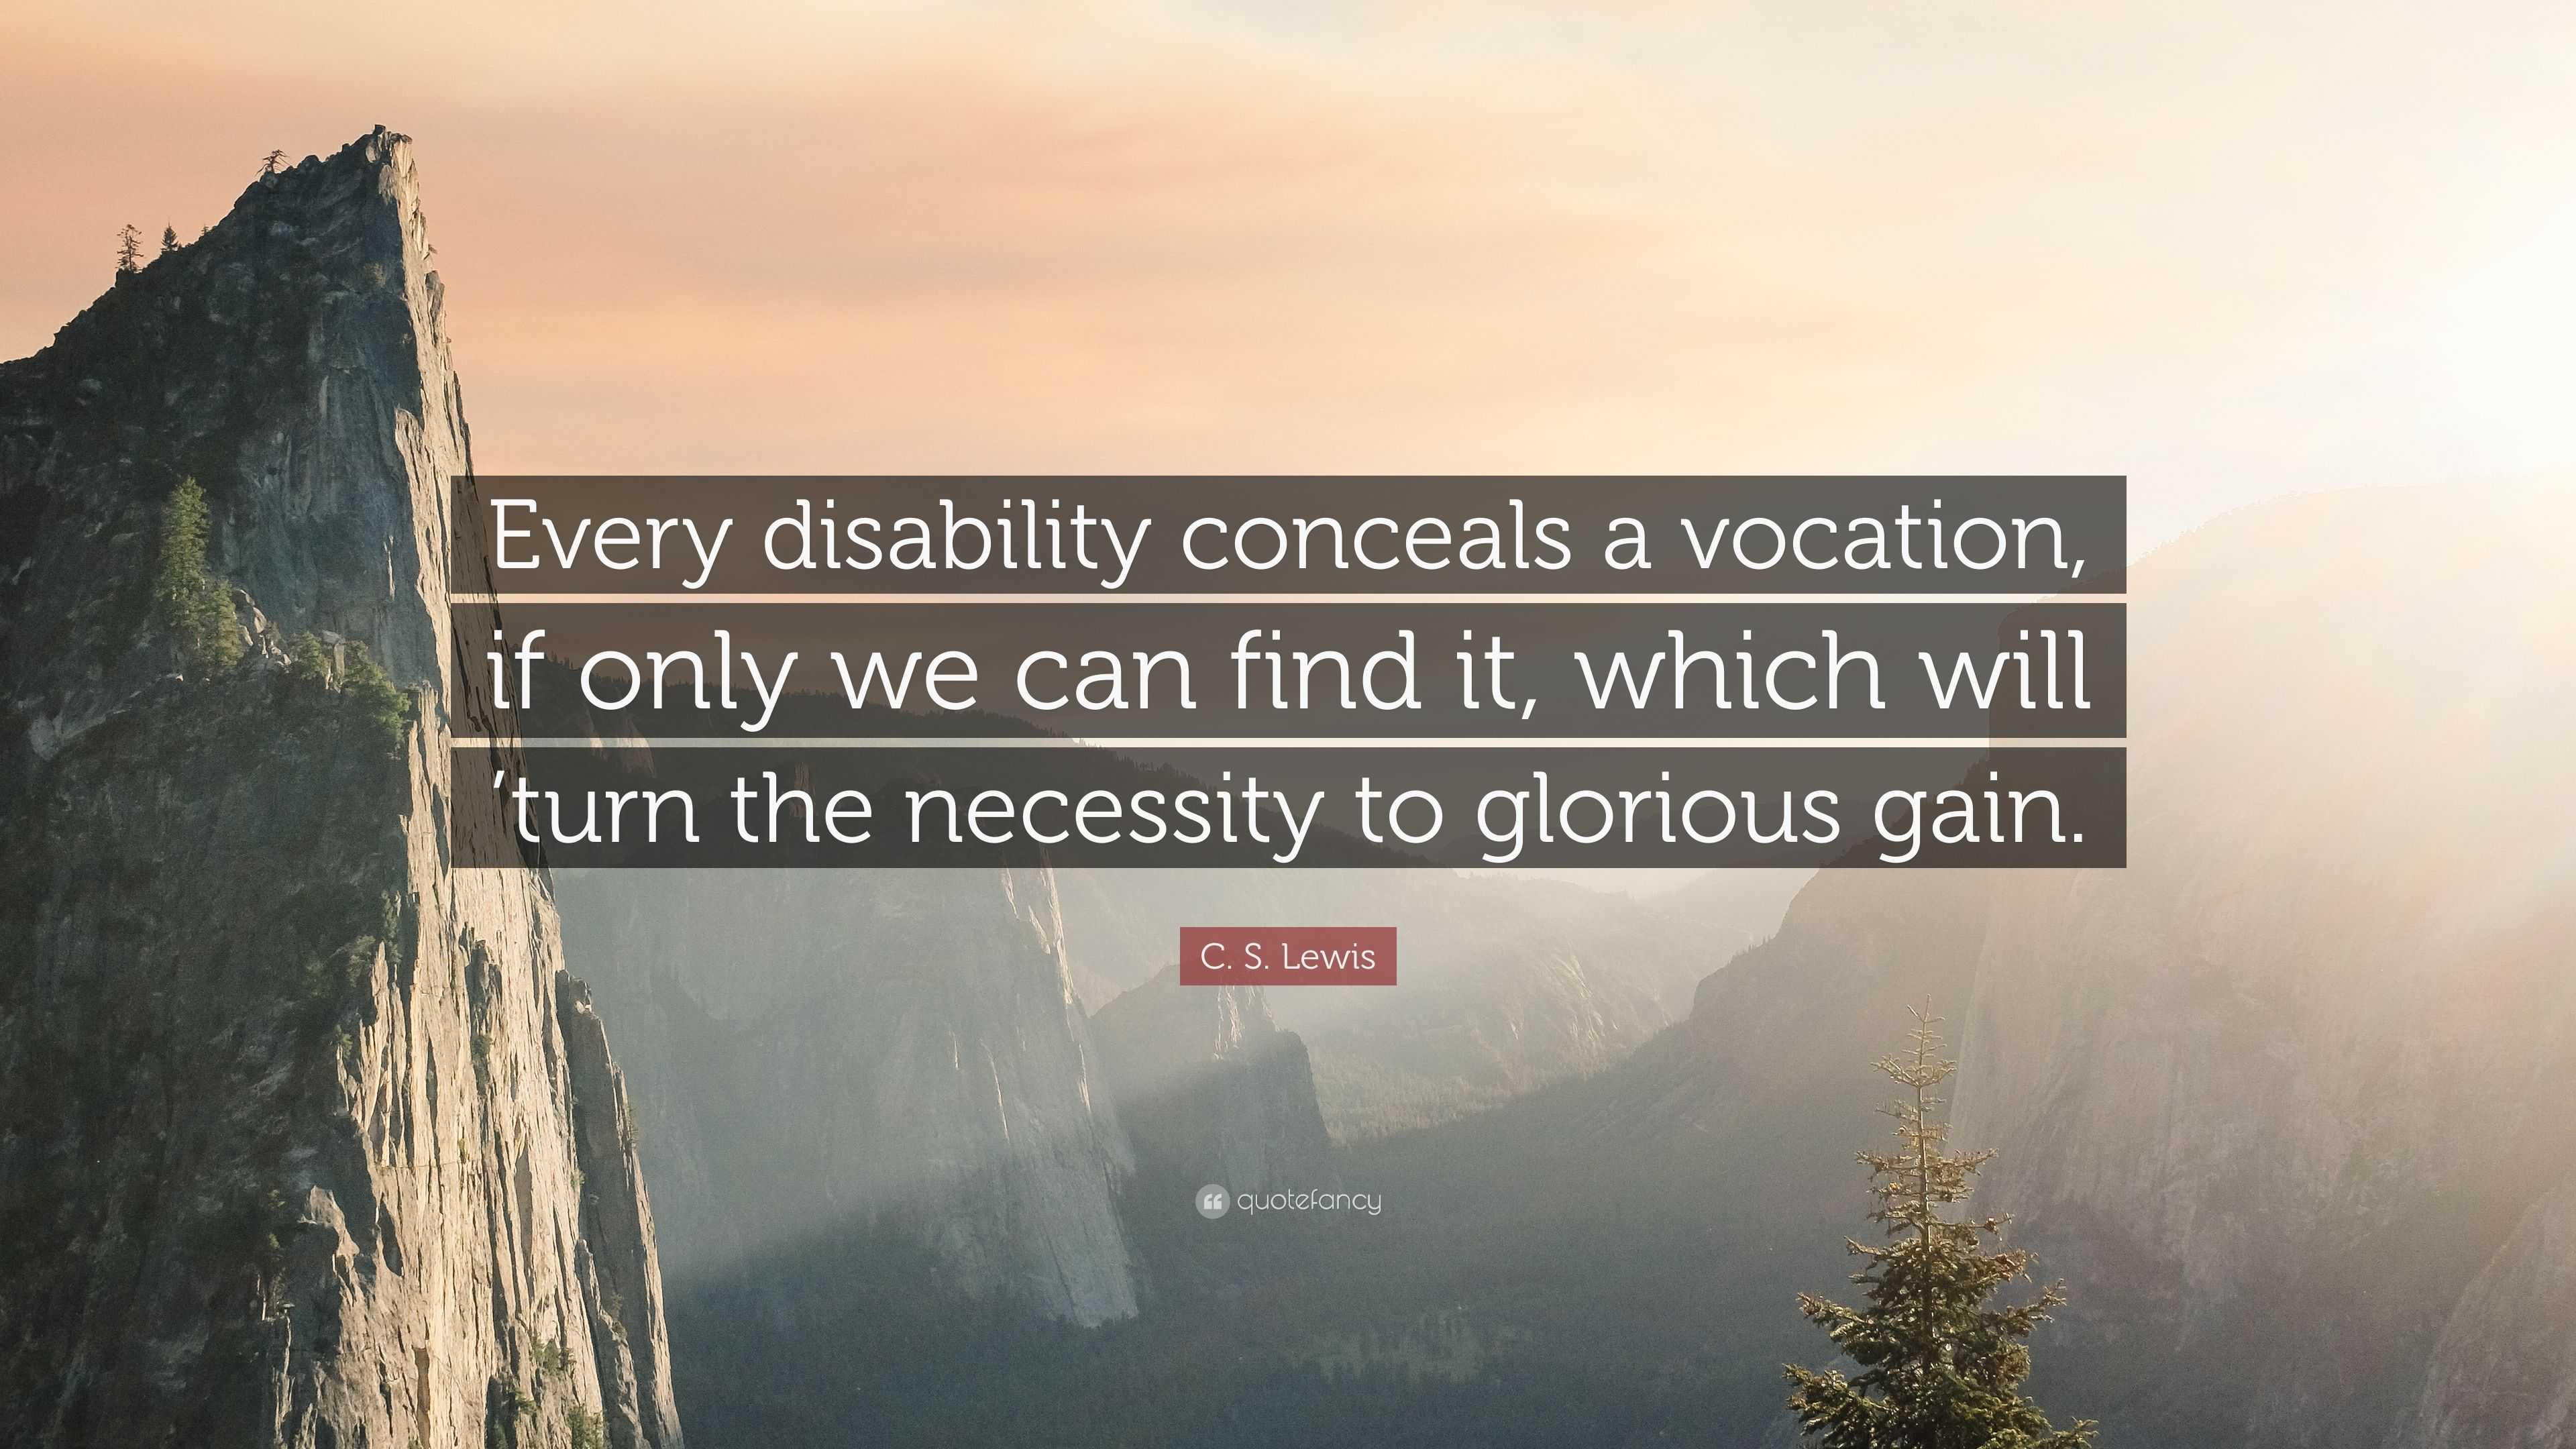 C. S. Lewis Quote: “Every disability conceals a vocation, if only we ...